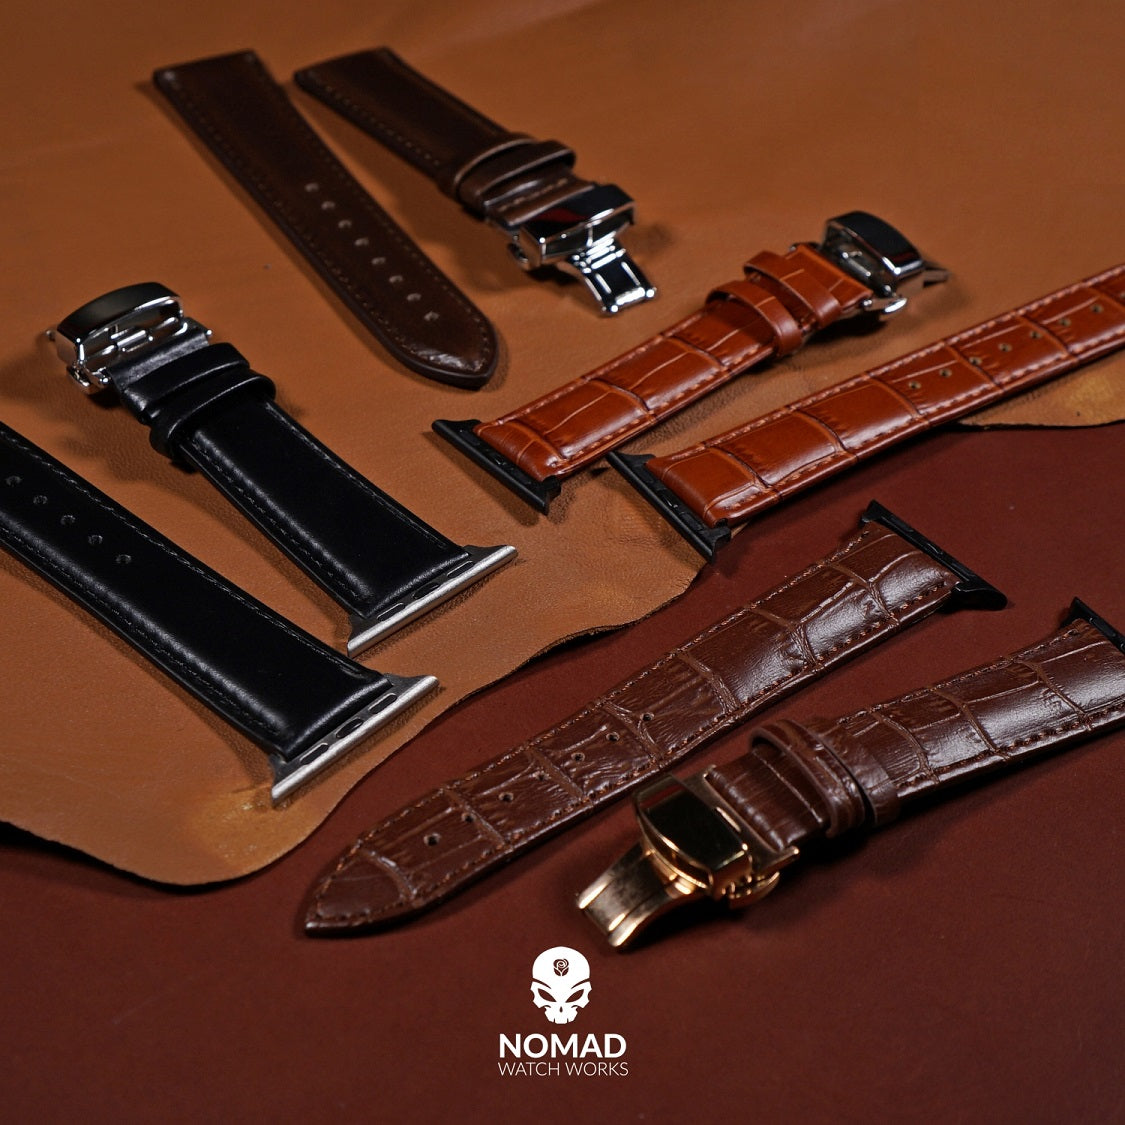 Apple Watch Genuine Croc Pattern Leather Watch Strap in Tan w/ Butterfly Clasp (38 & 40mm) - Nomad Watch Works Malaysia